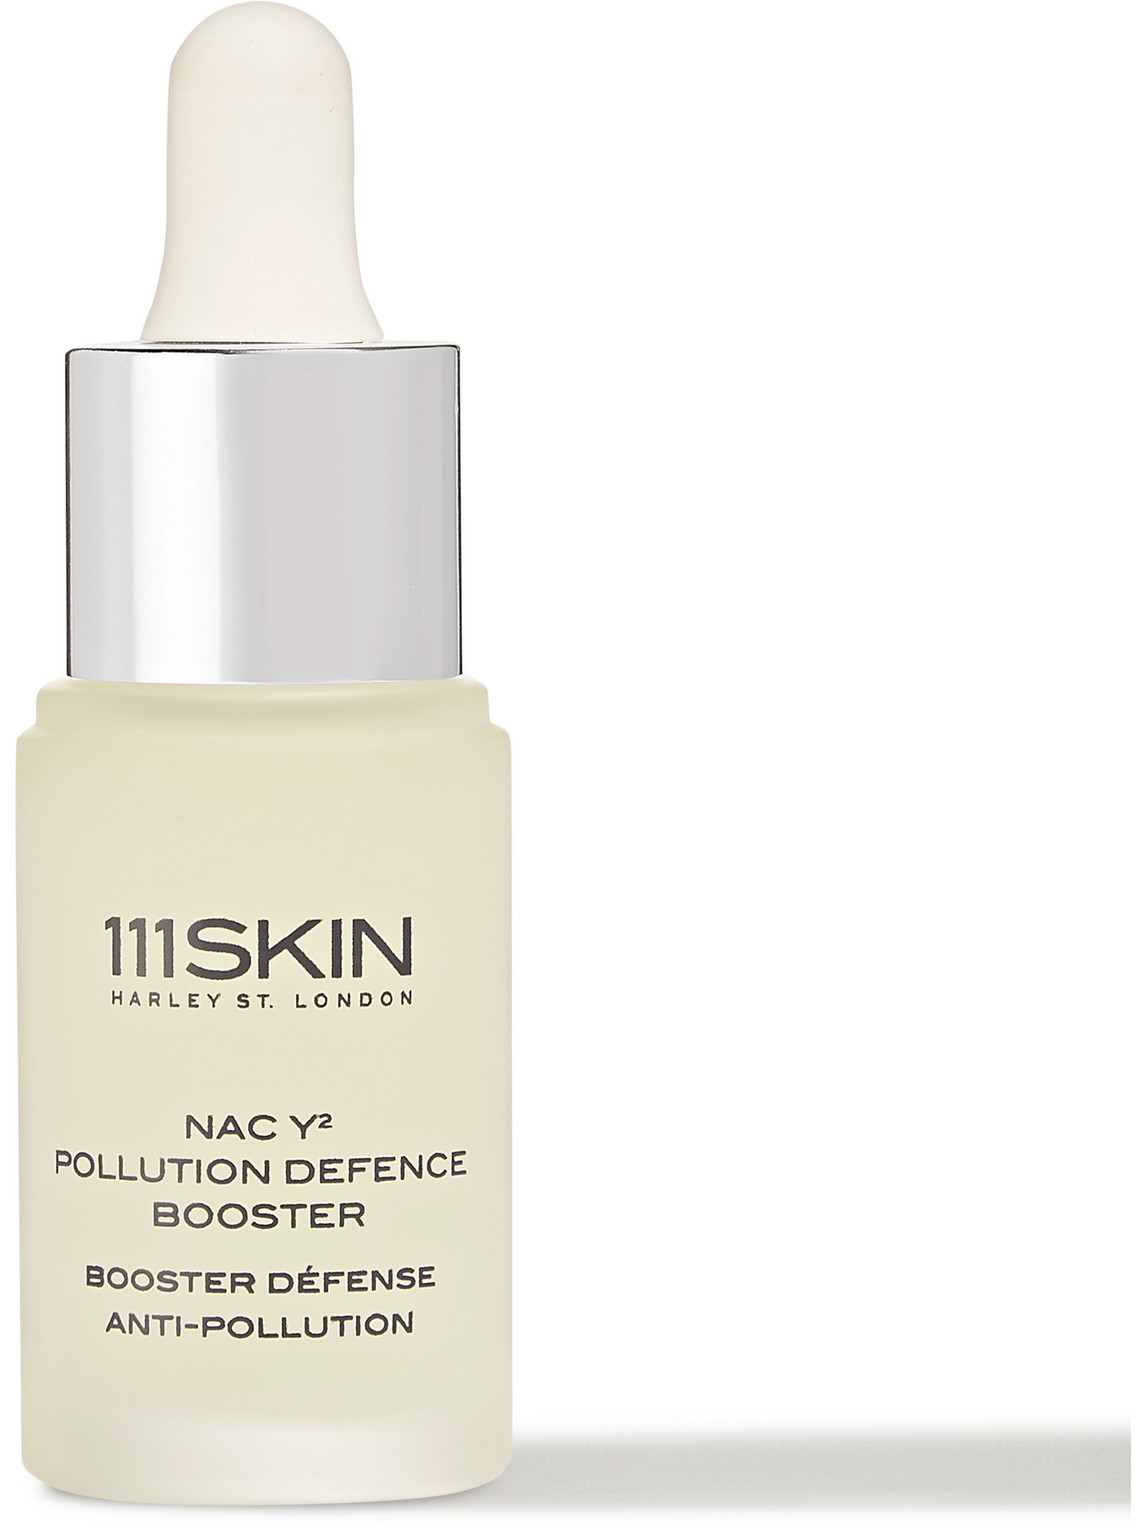 111skin Pollution Defence Booster, 20ml In White